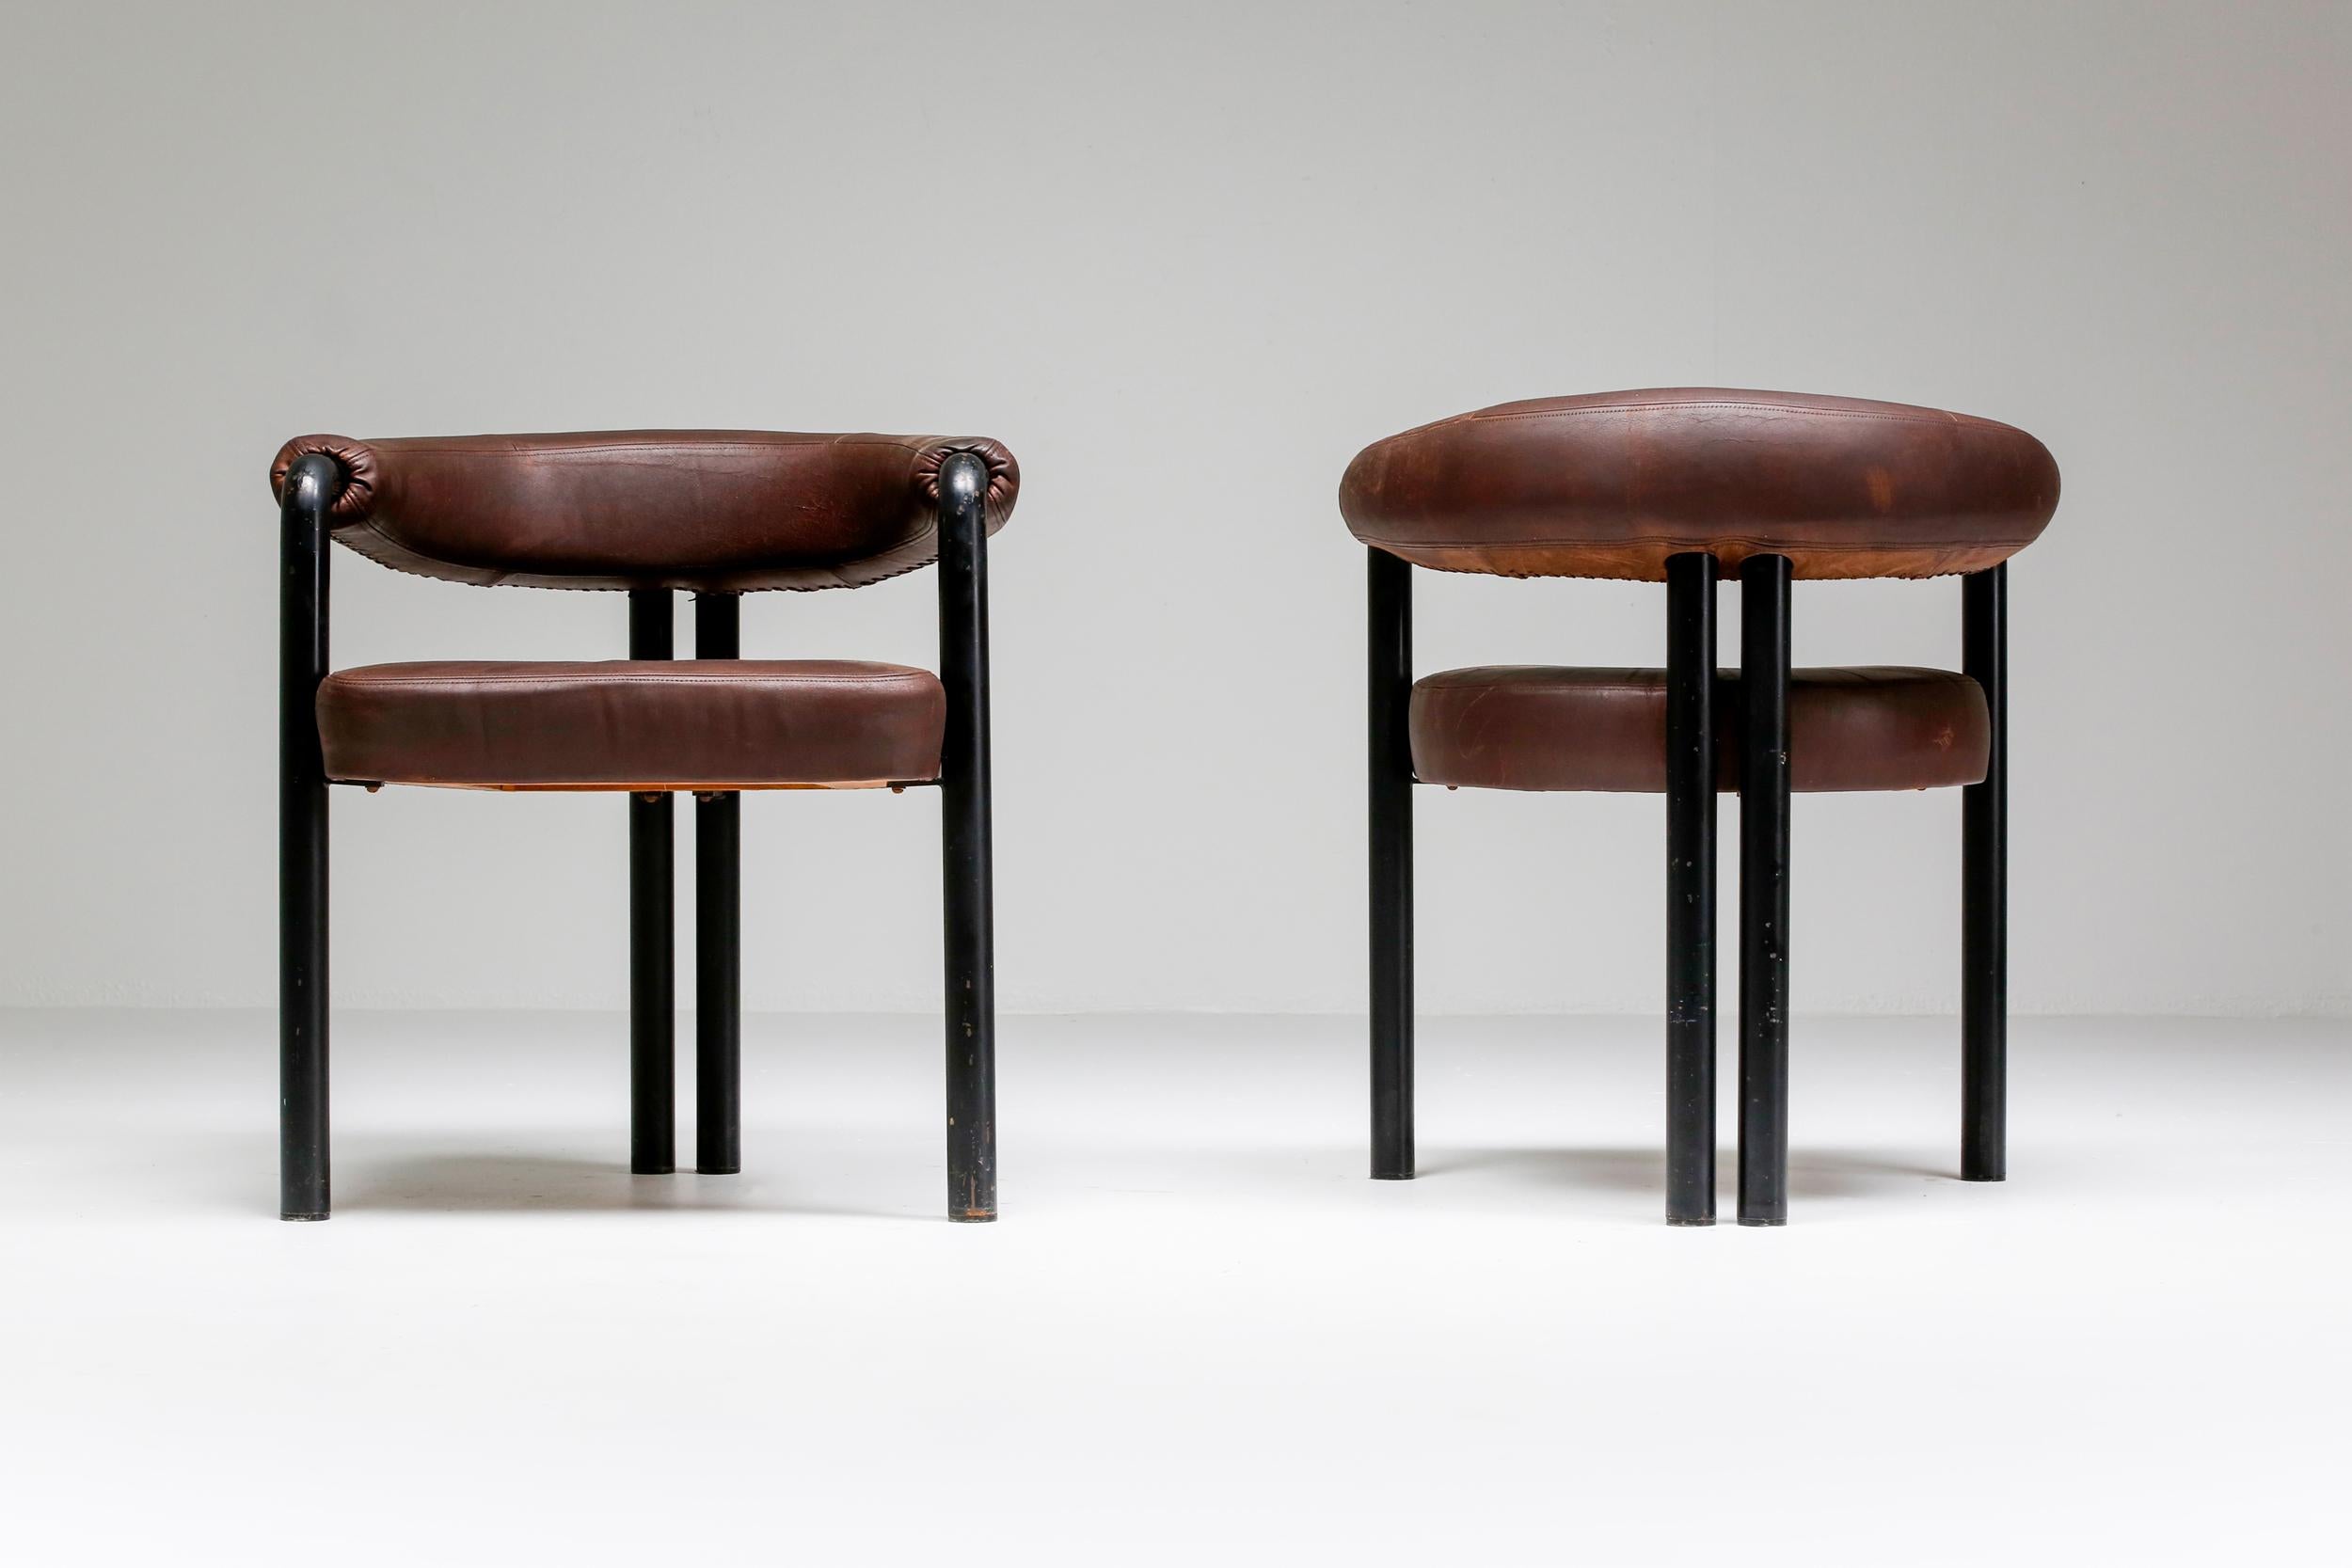 Mid-20th Century De Sede Dining Chairs by Nienkamper in Brown Leather and Black Tubular Steel